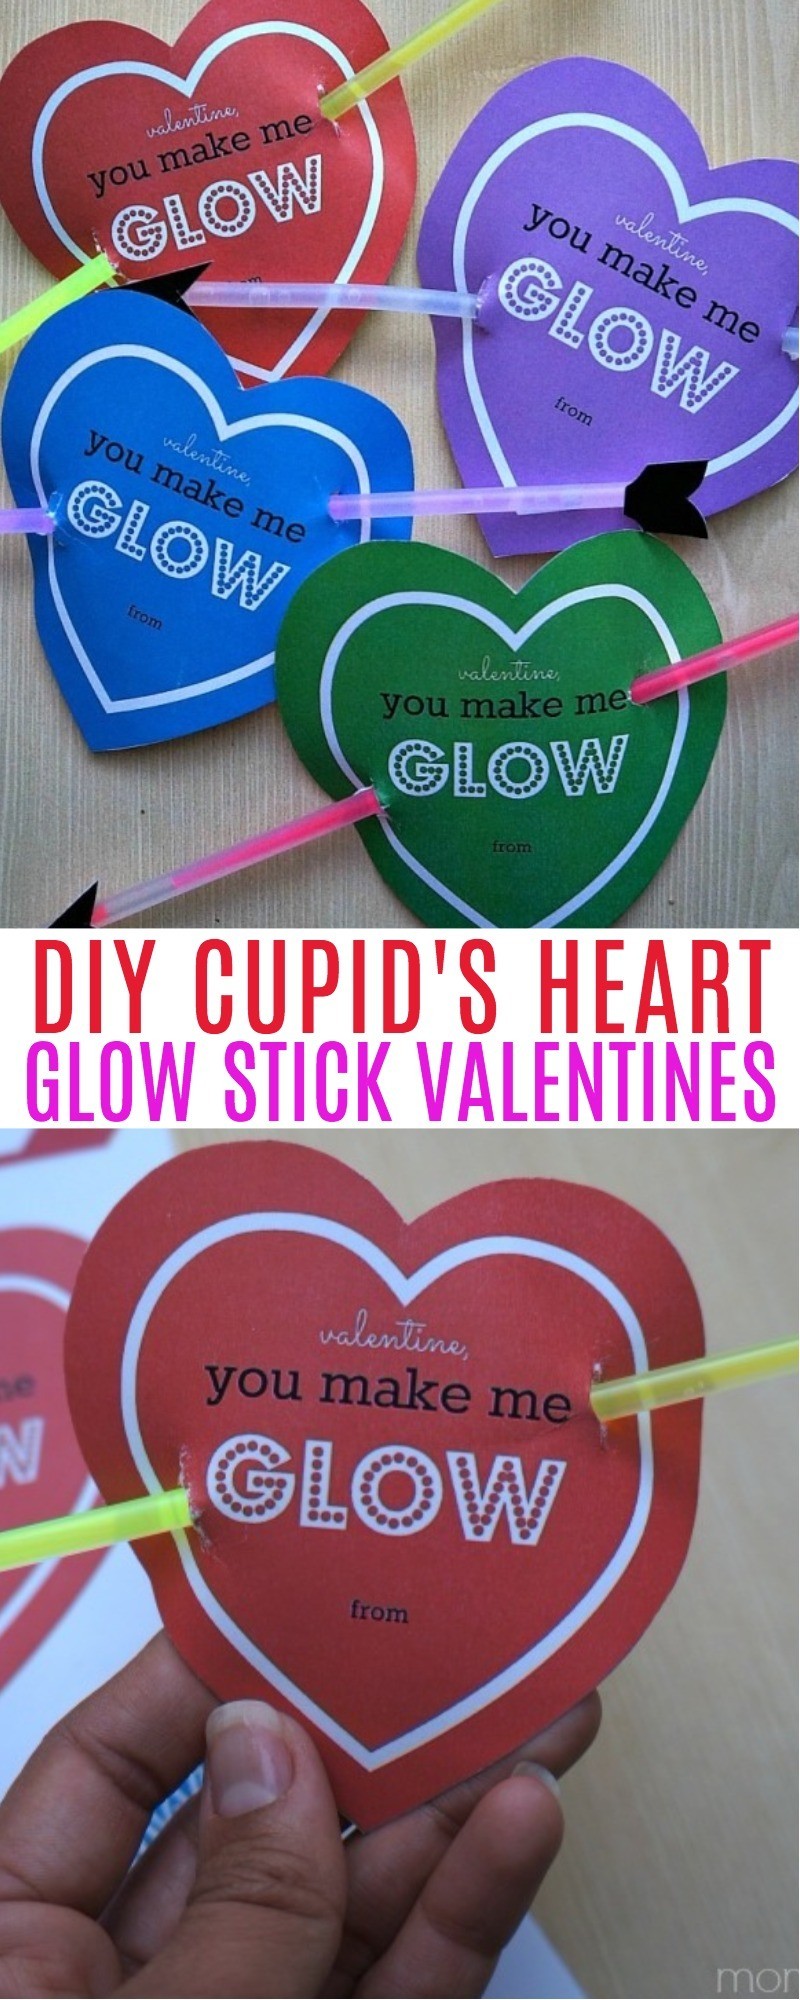 cupid-s-heart-glow-stick-valentines-cute-diy-valentine-cards-for-kids